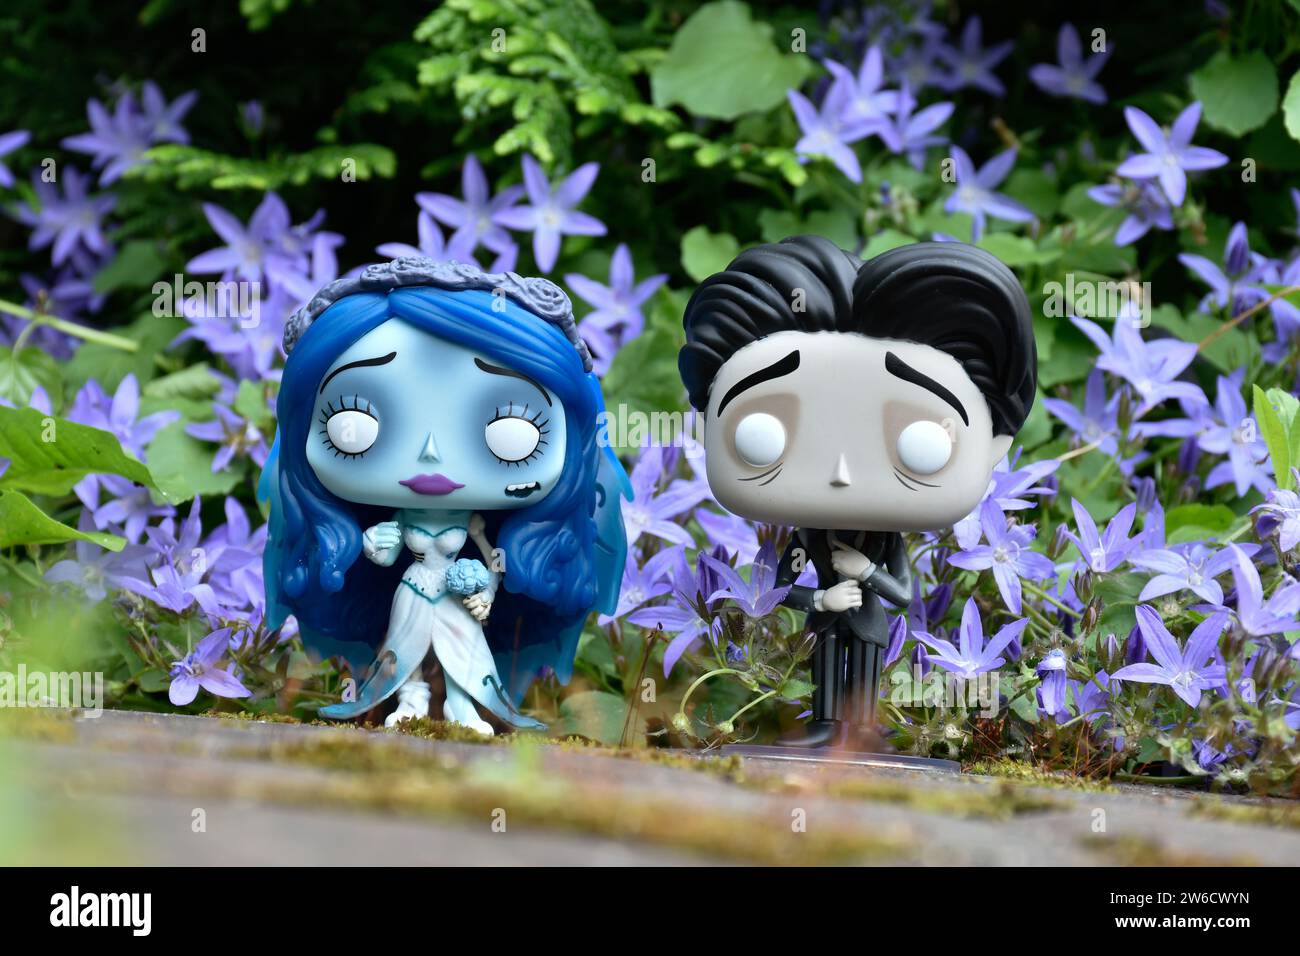 Funko Pop action figures of Emily and Victor from dark fantasy animated film Corpse Bride. Blue flowers, moss, garden, wedding, couple, romance. Stock Photo